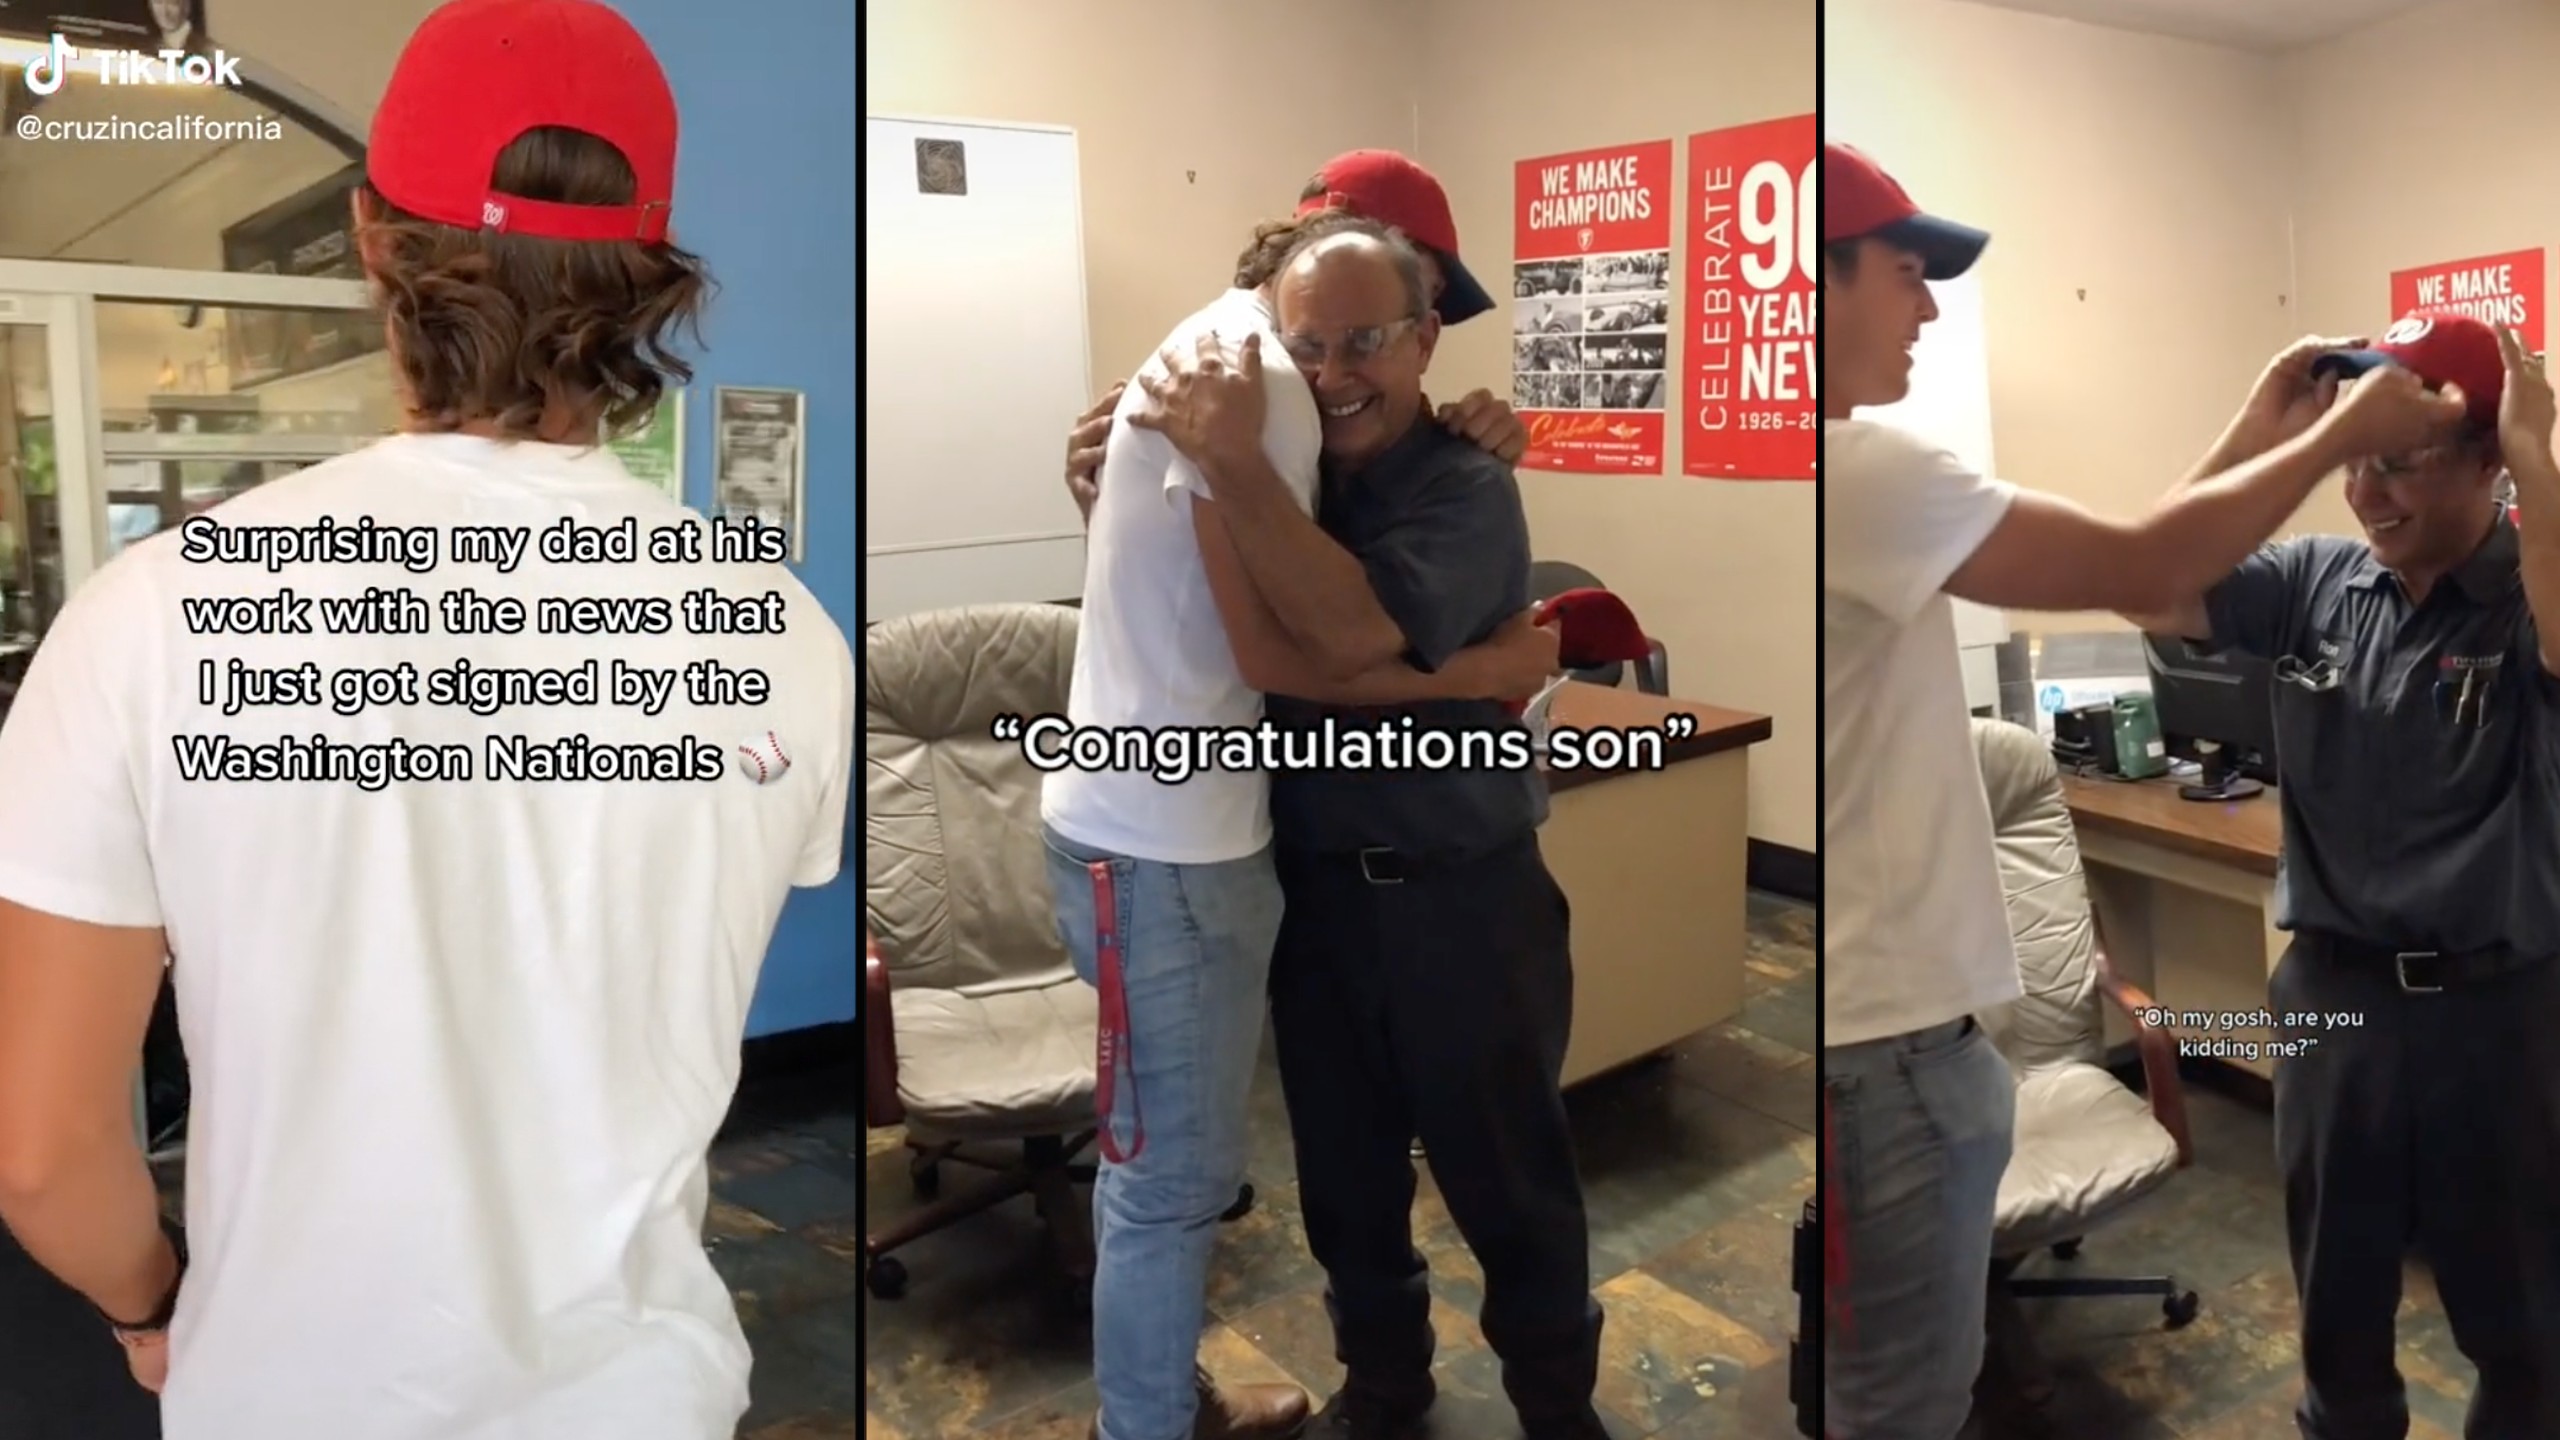 Baseball player surprises dad with news that he was signed to a major league team